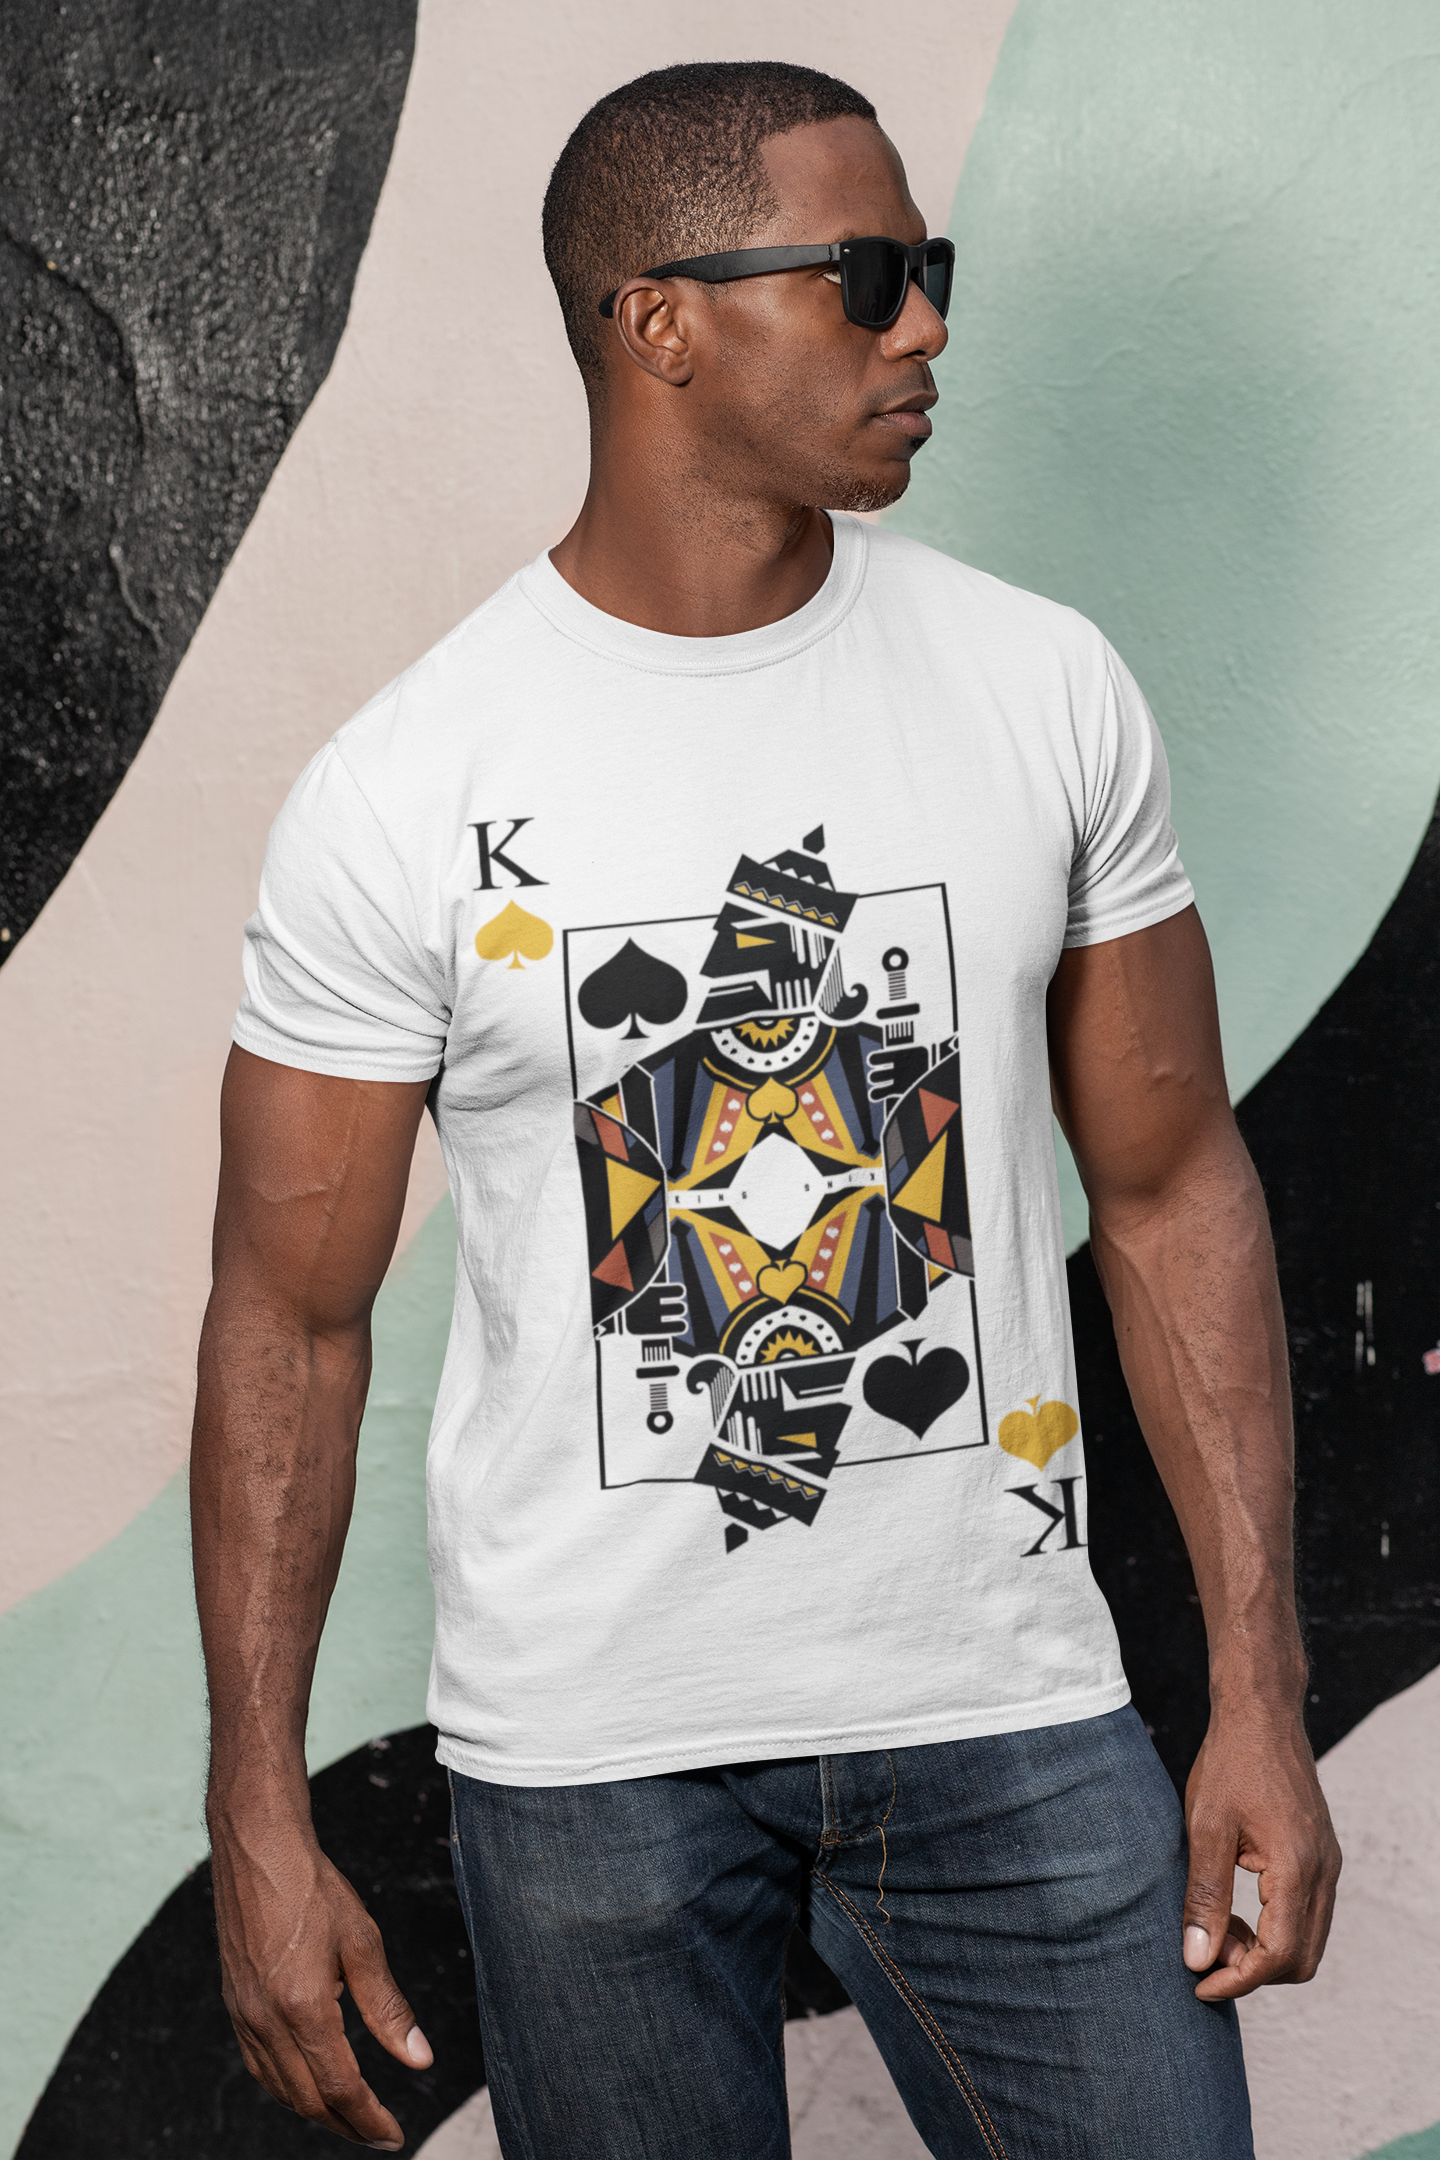 King of Spades Graphic Tee